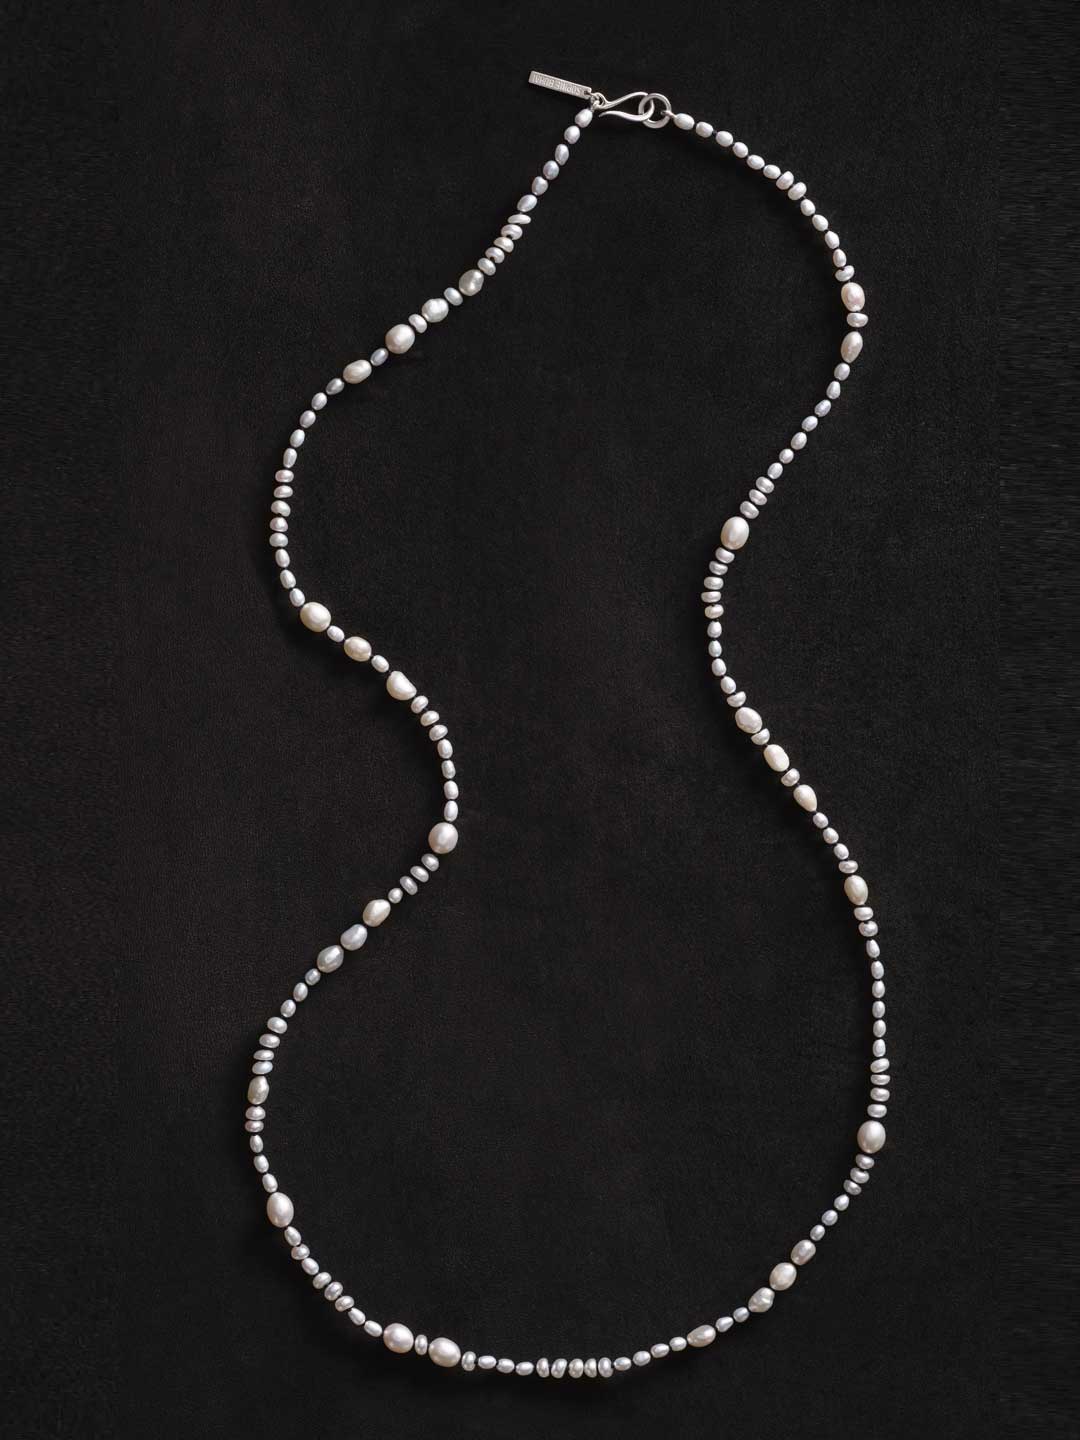 White Pearl Mermaid Necklace 76cm - Silver